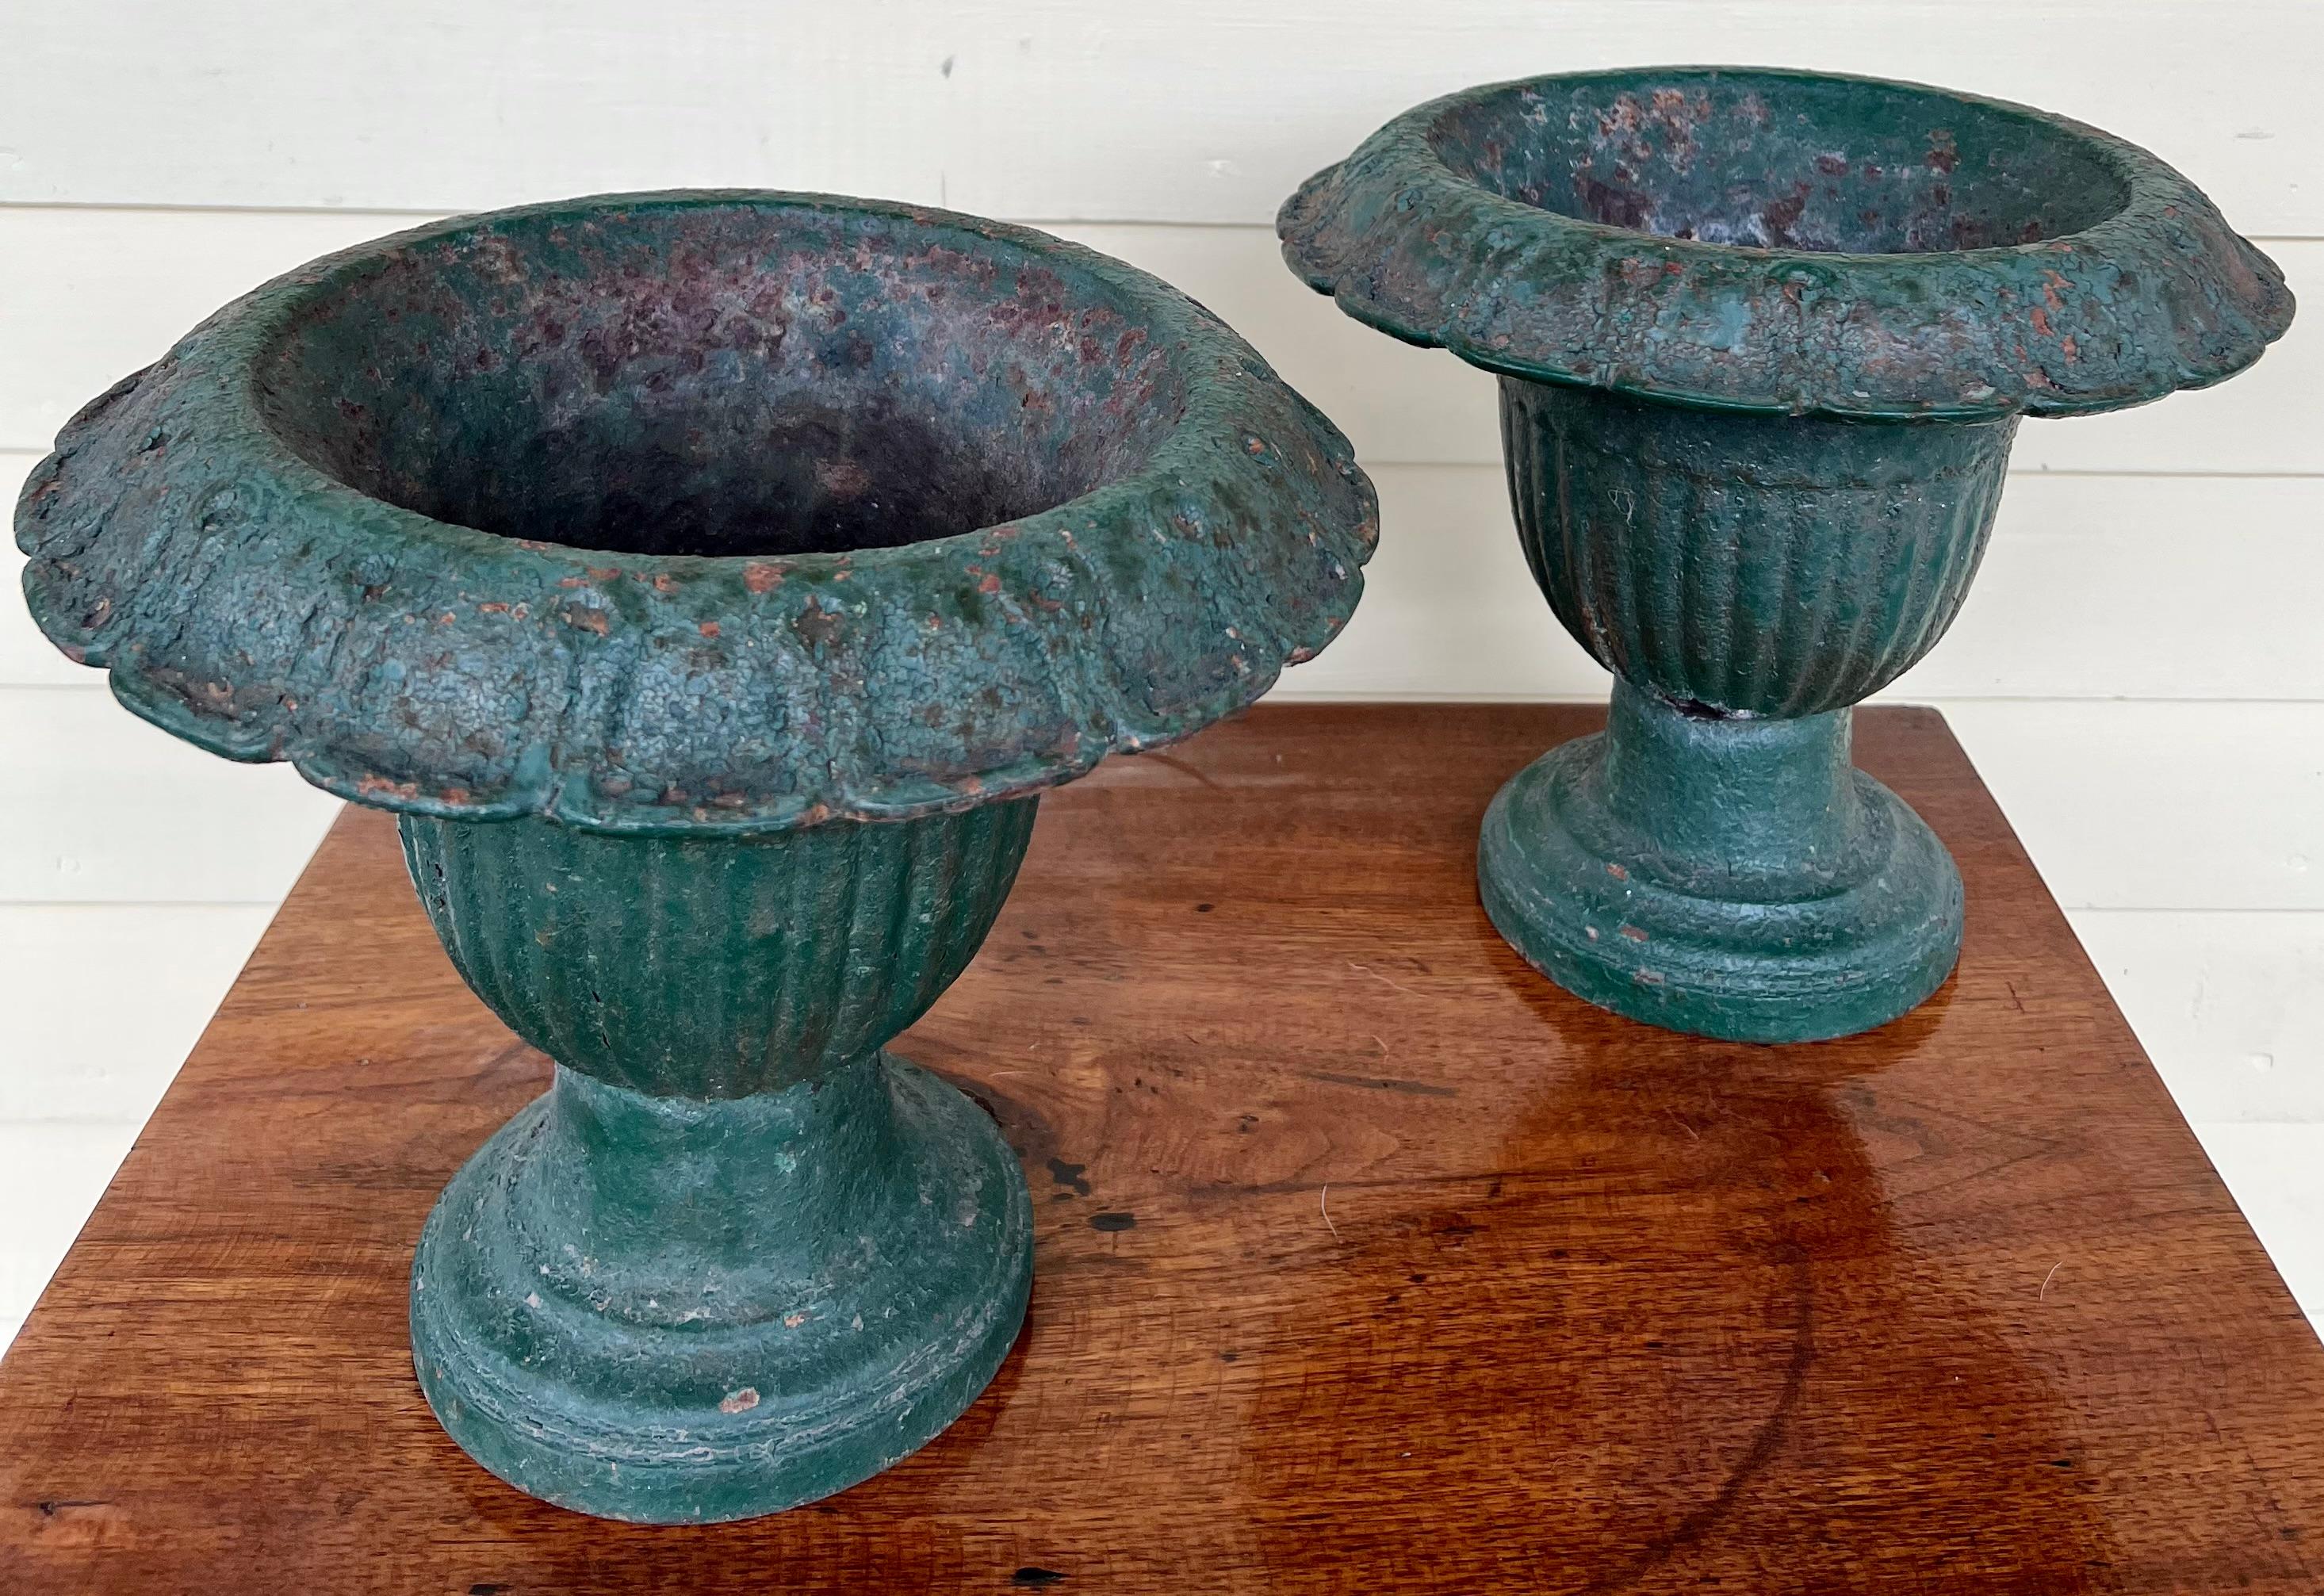 Unusal small sized pair of green painted cast iron urns. The paint is early and the patina is beautifully worn. There is one chip out of one of the bases, but it may have been a dent or done in production as the area has the same early green paint